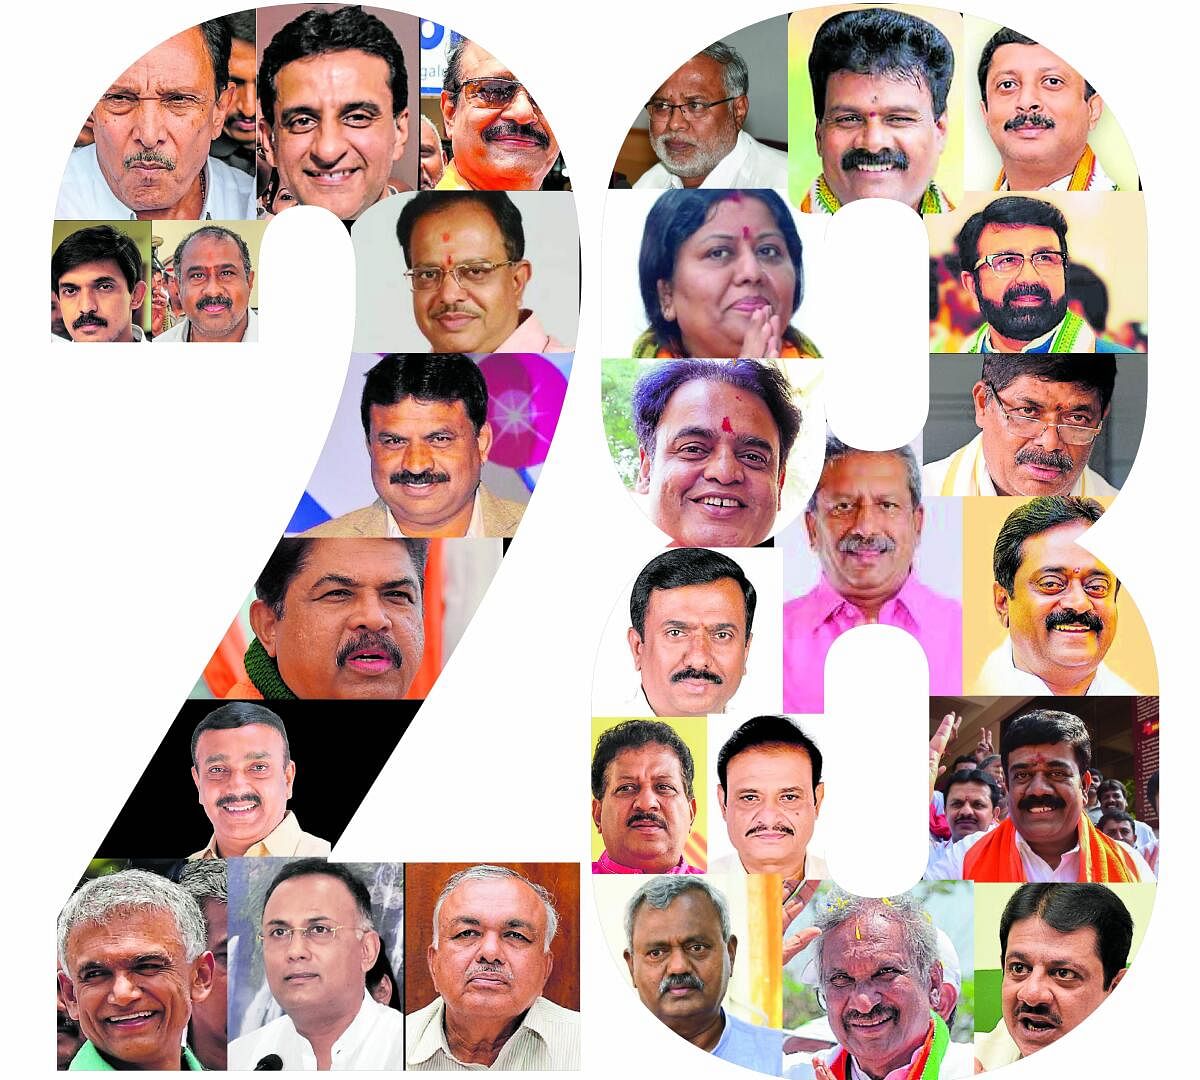 Bengaluru's 28 MLAs: Can they work as one team?